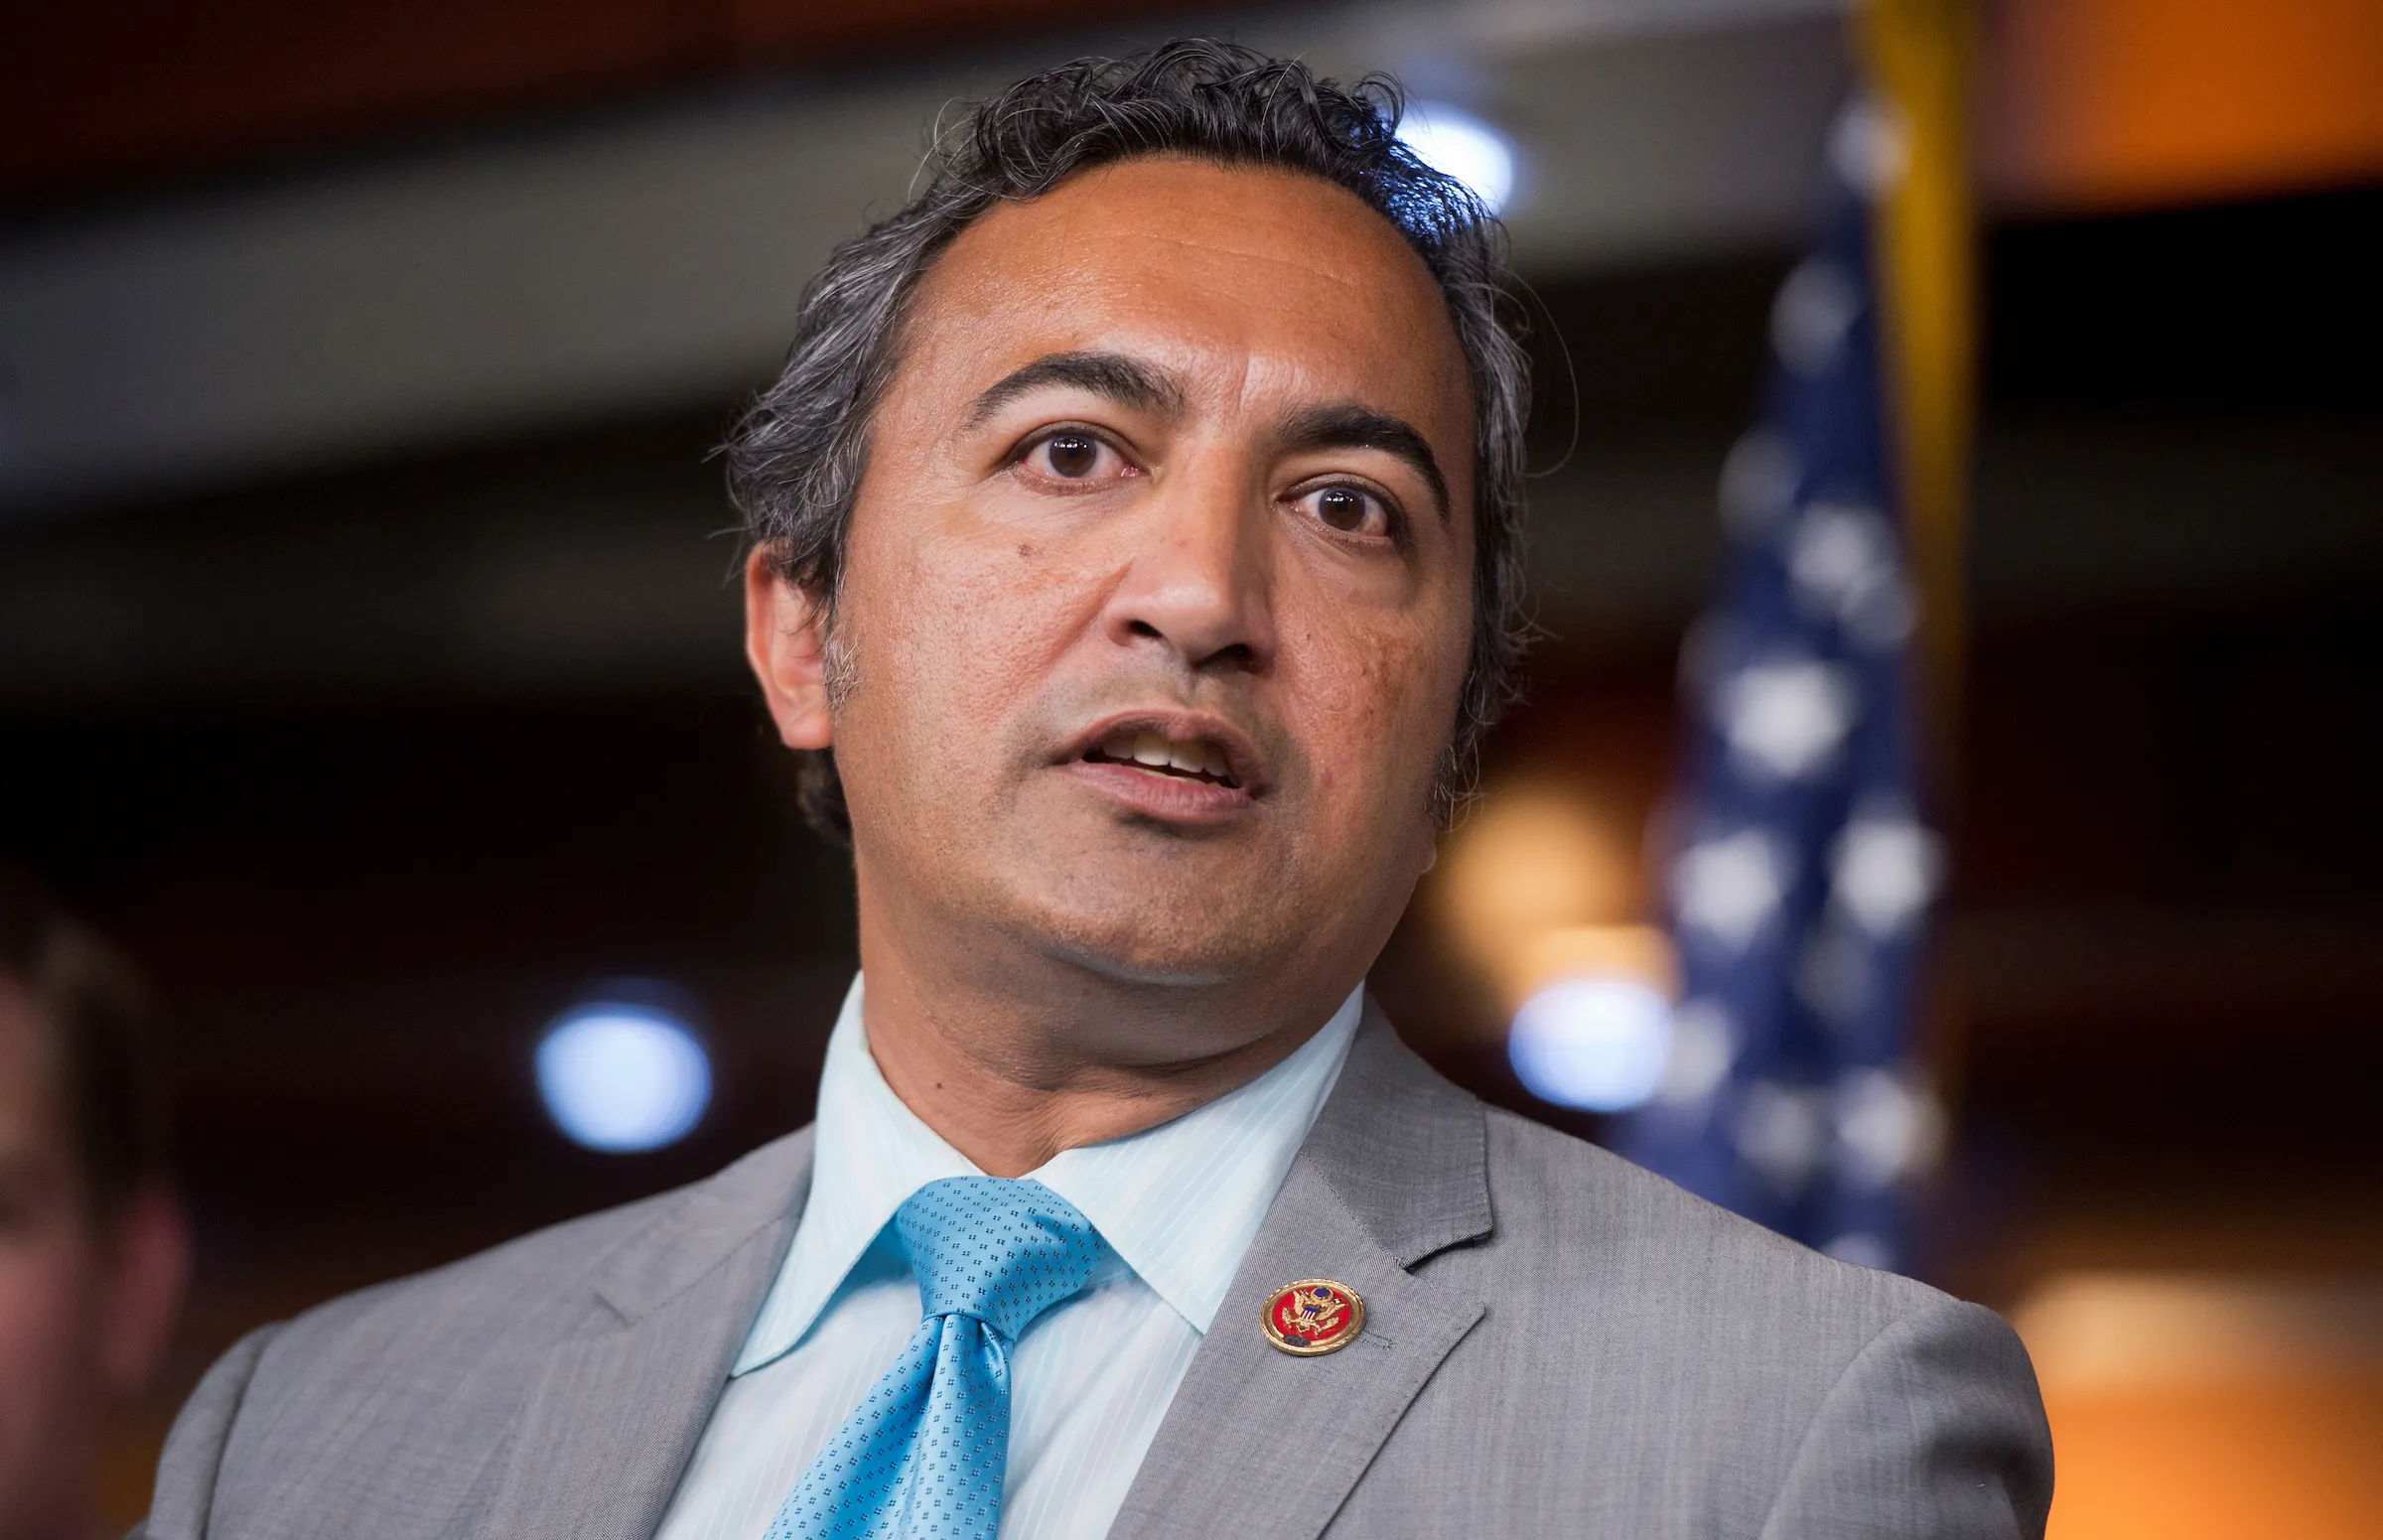 Indian American Ami Bera Named to House Intelligence Committee